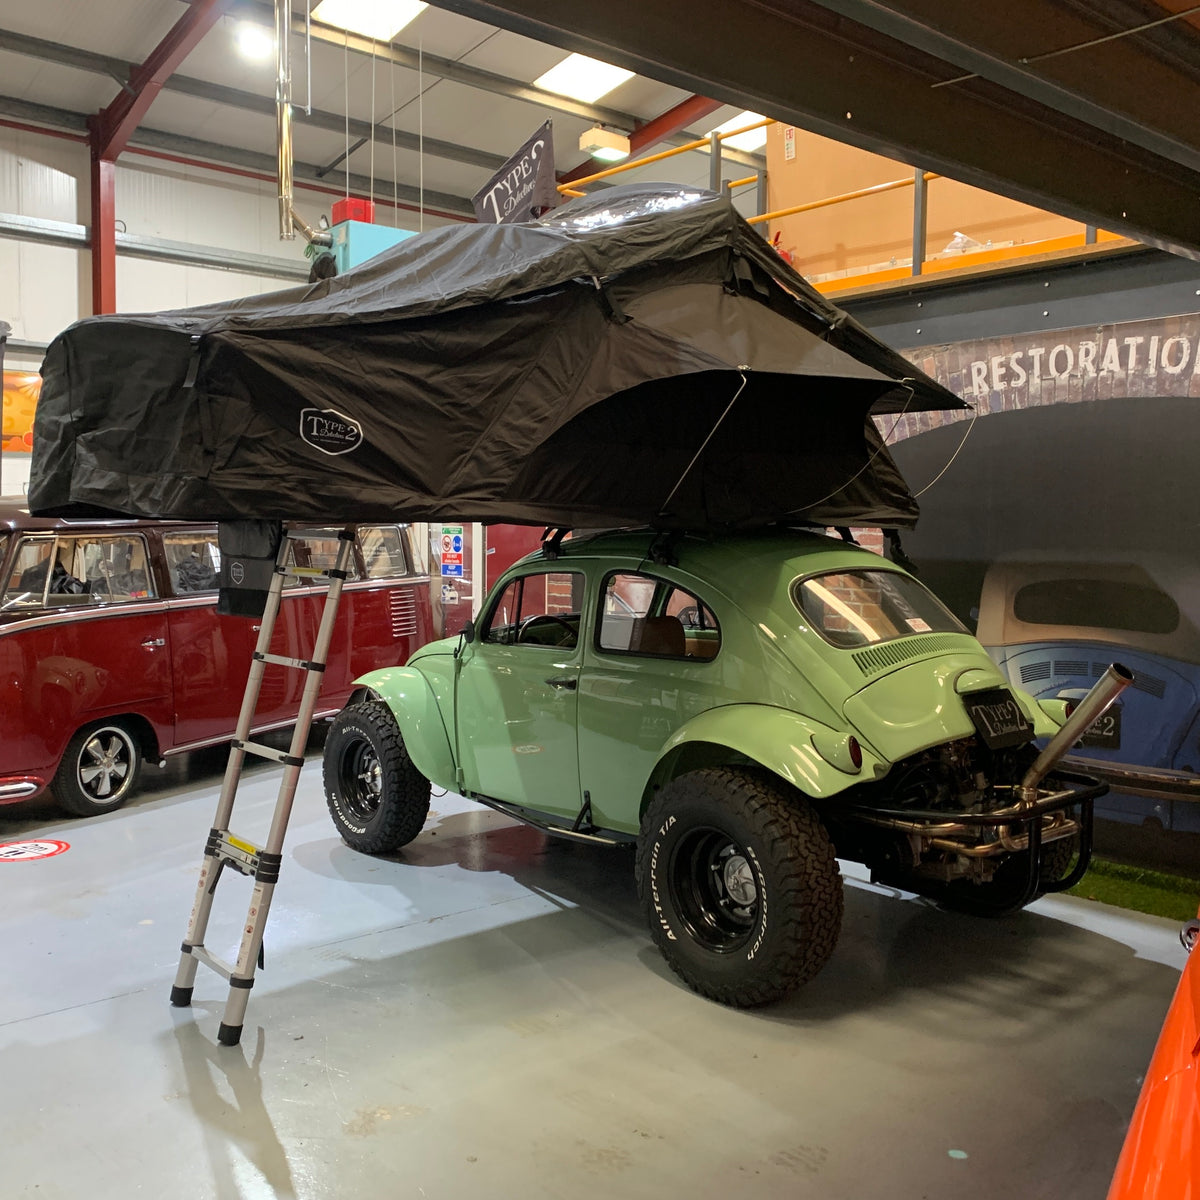 Type 2 Detectives Adventure Roof Tent - Limited Edition